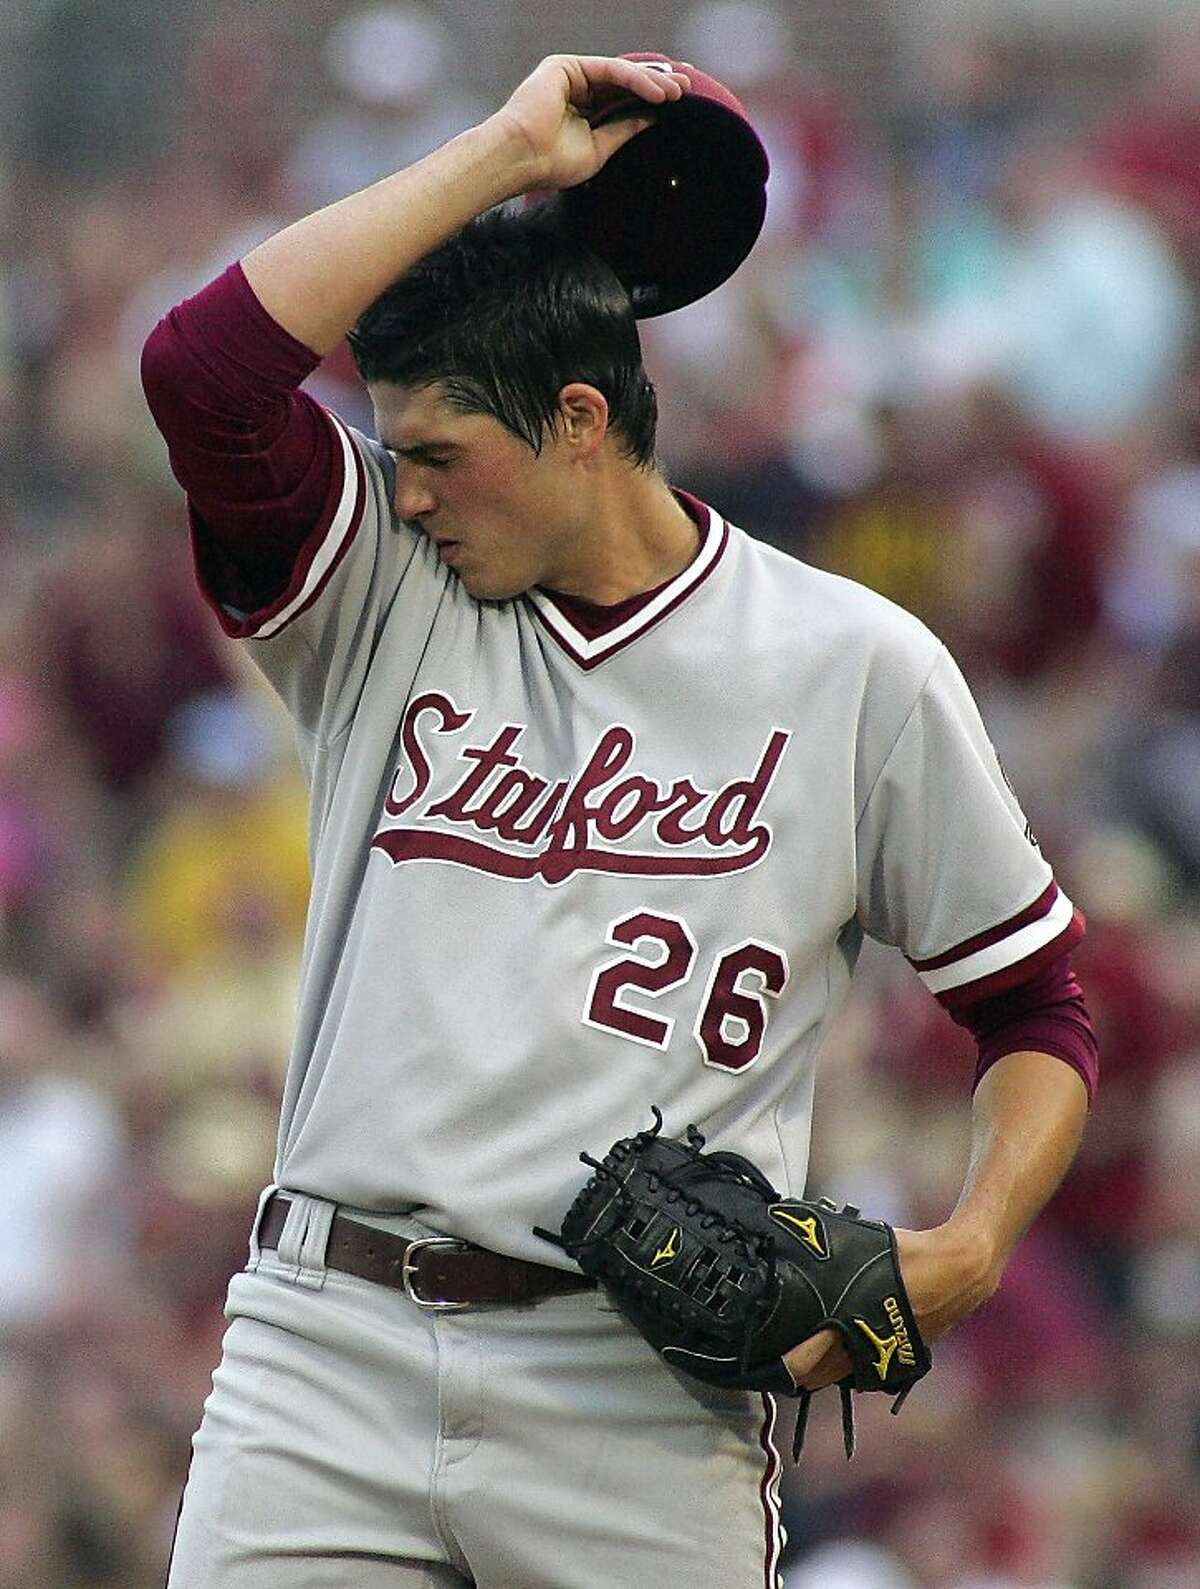 Stanford pitcher Mark Appel reacts in the fourth inning of an NCAA college baseball tournament super regional game against Florida State, Friday, June 8, 2012, in Tallahassee, Fla. (AP Photo/Phil Sears)